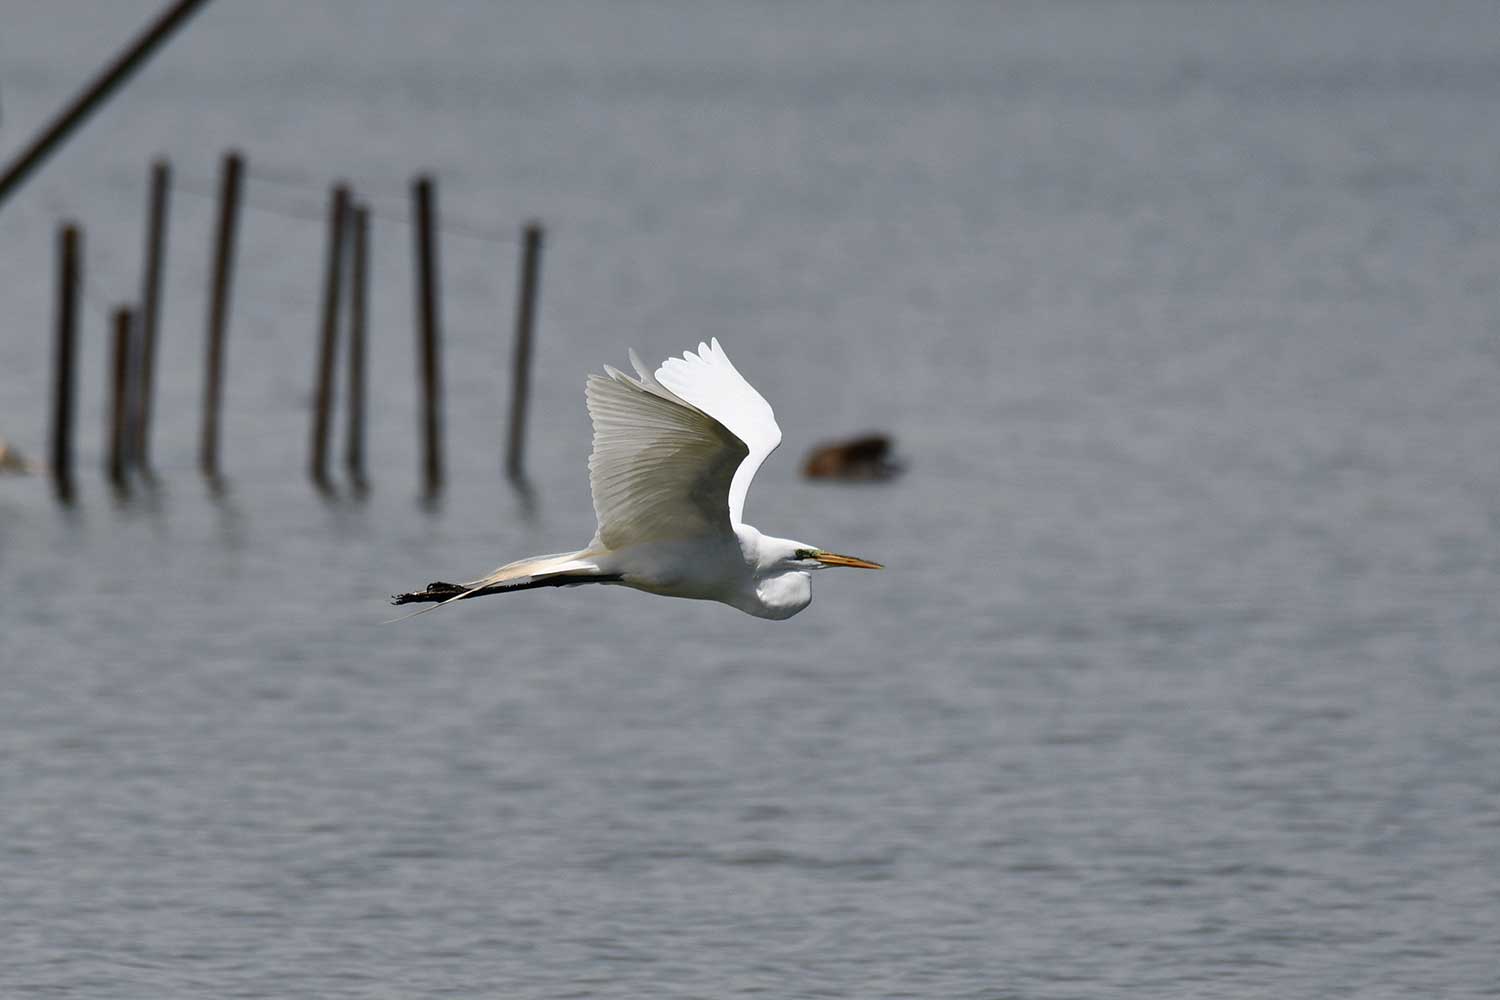 A great egret flying over water.